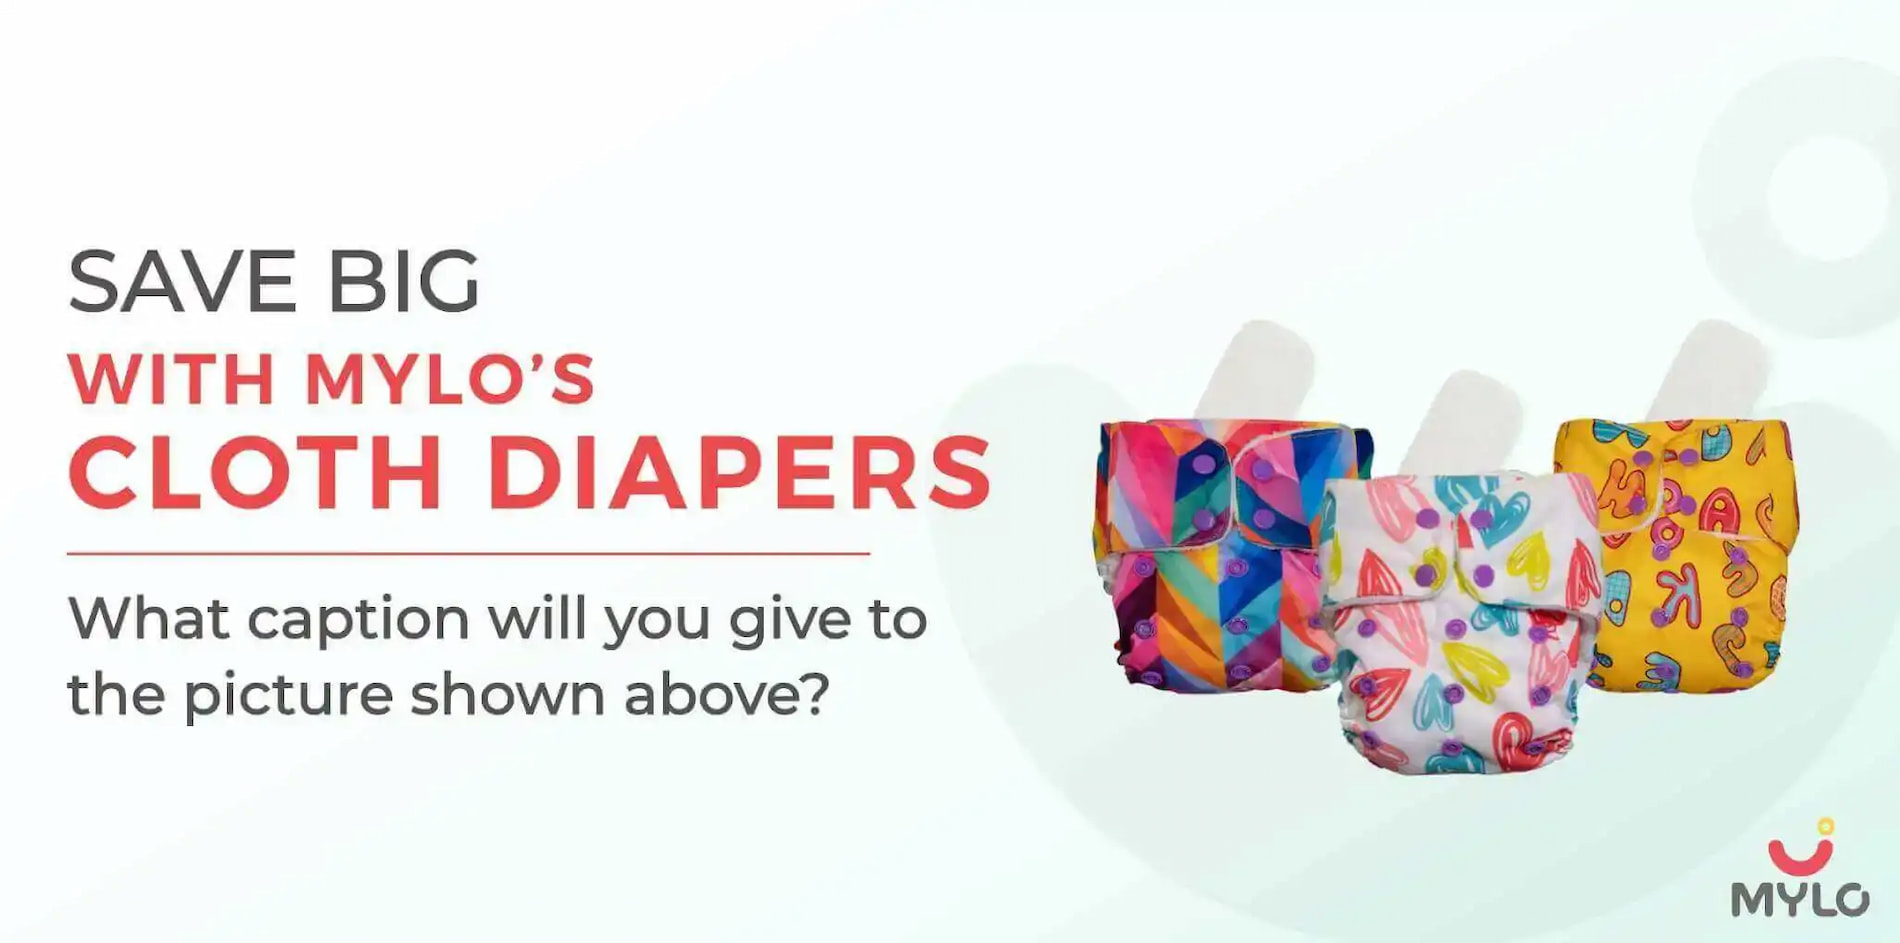 Baby cloth diapers by Mylo